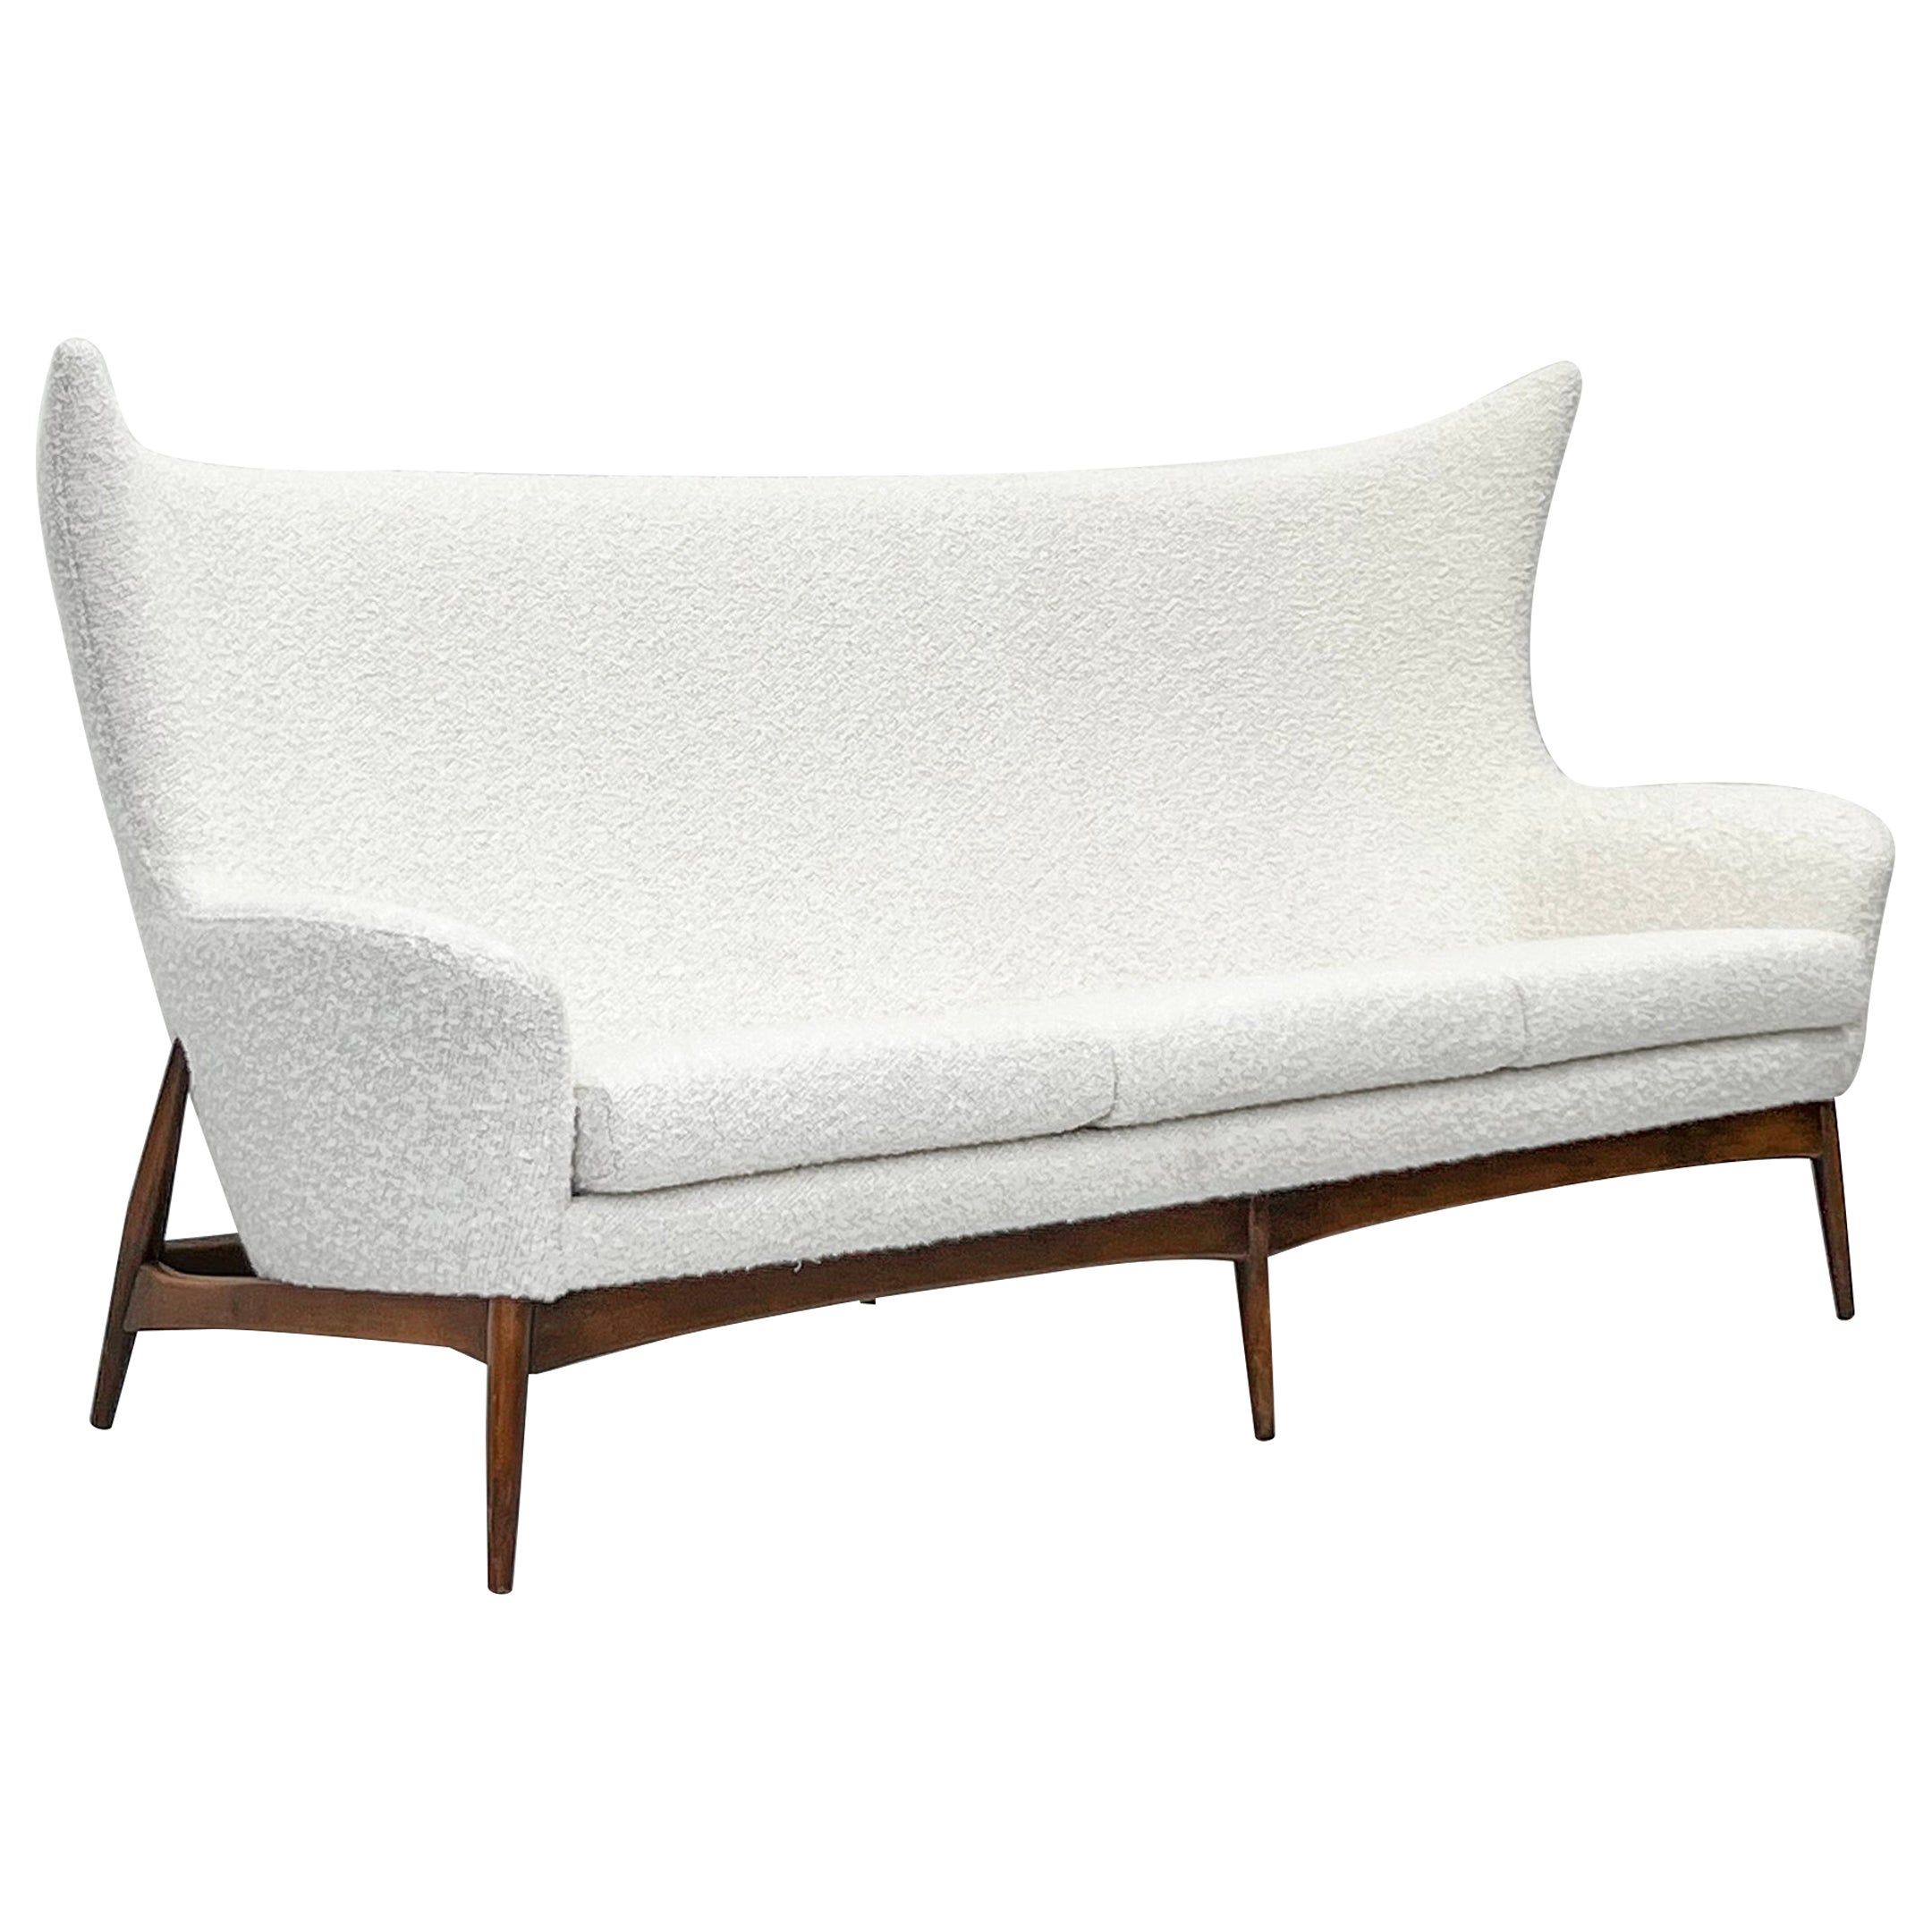 Sculptural Wingback Sofa by H.W. Klein for Bramin Mobler of Denmark, 1950's For Sale